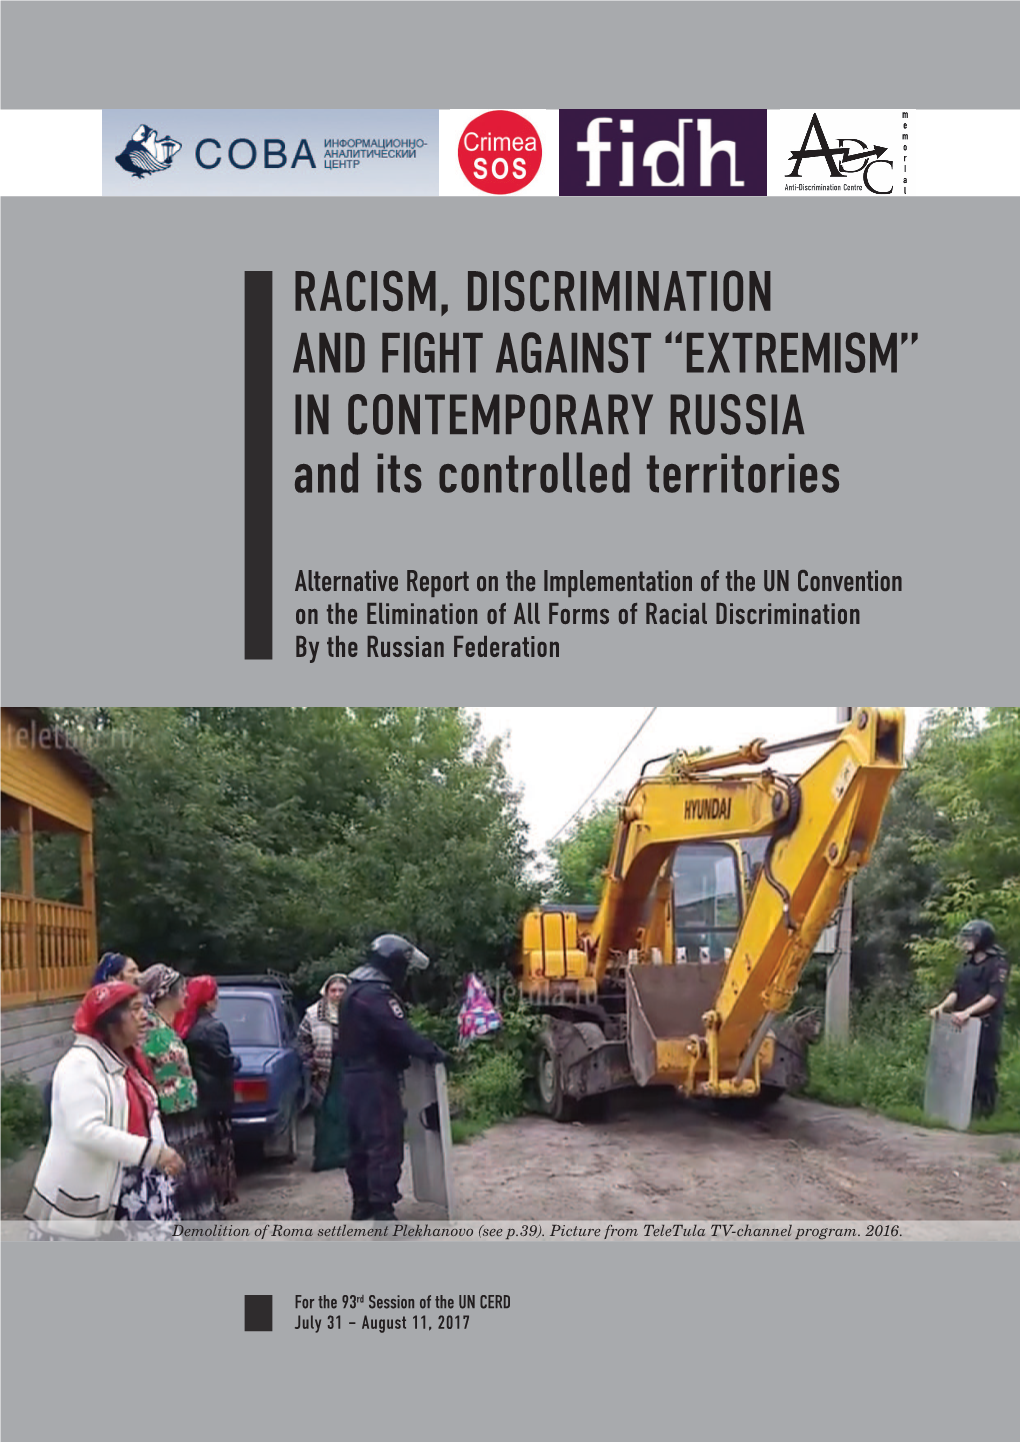 Racism, Discrimination and Fight Against “Extremism” in Contemporary Russia and Its Controlled Territories